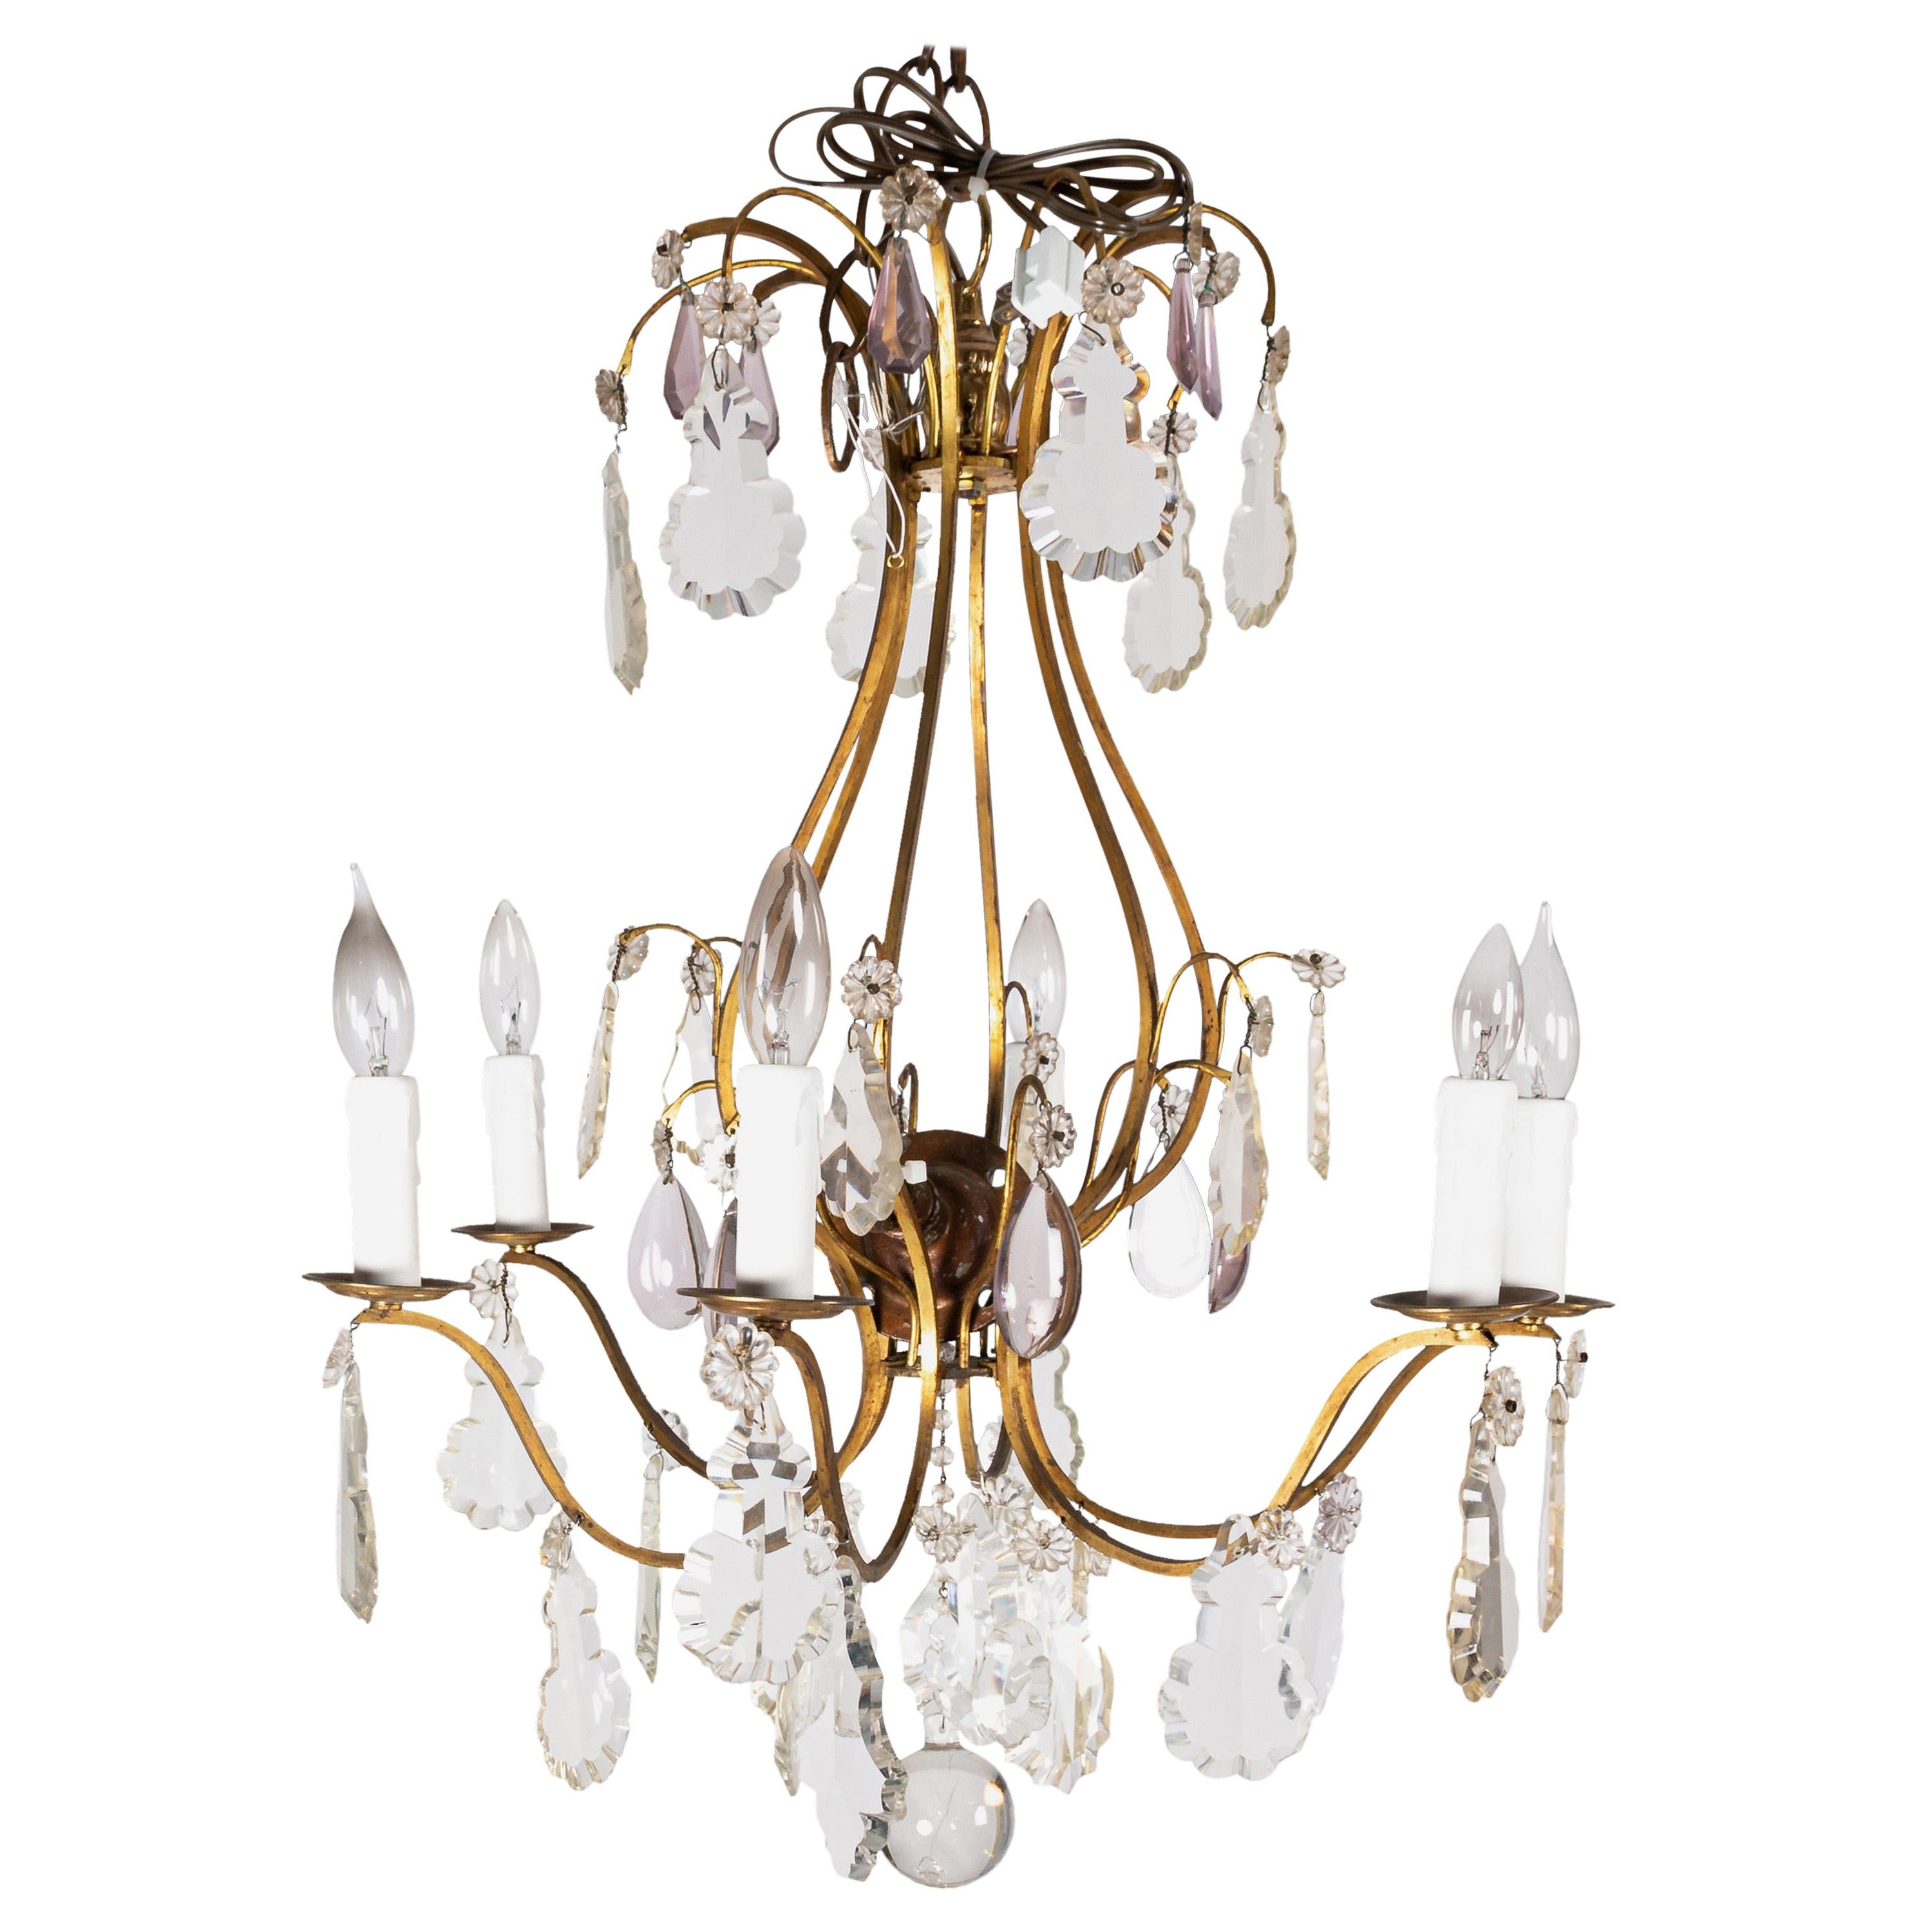 Late 19th Century French Scrolled Brass Chandelier